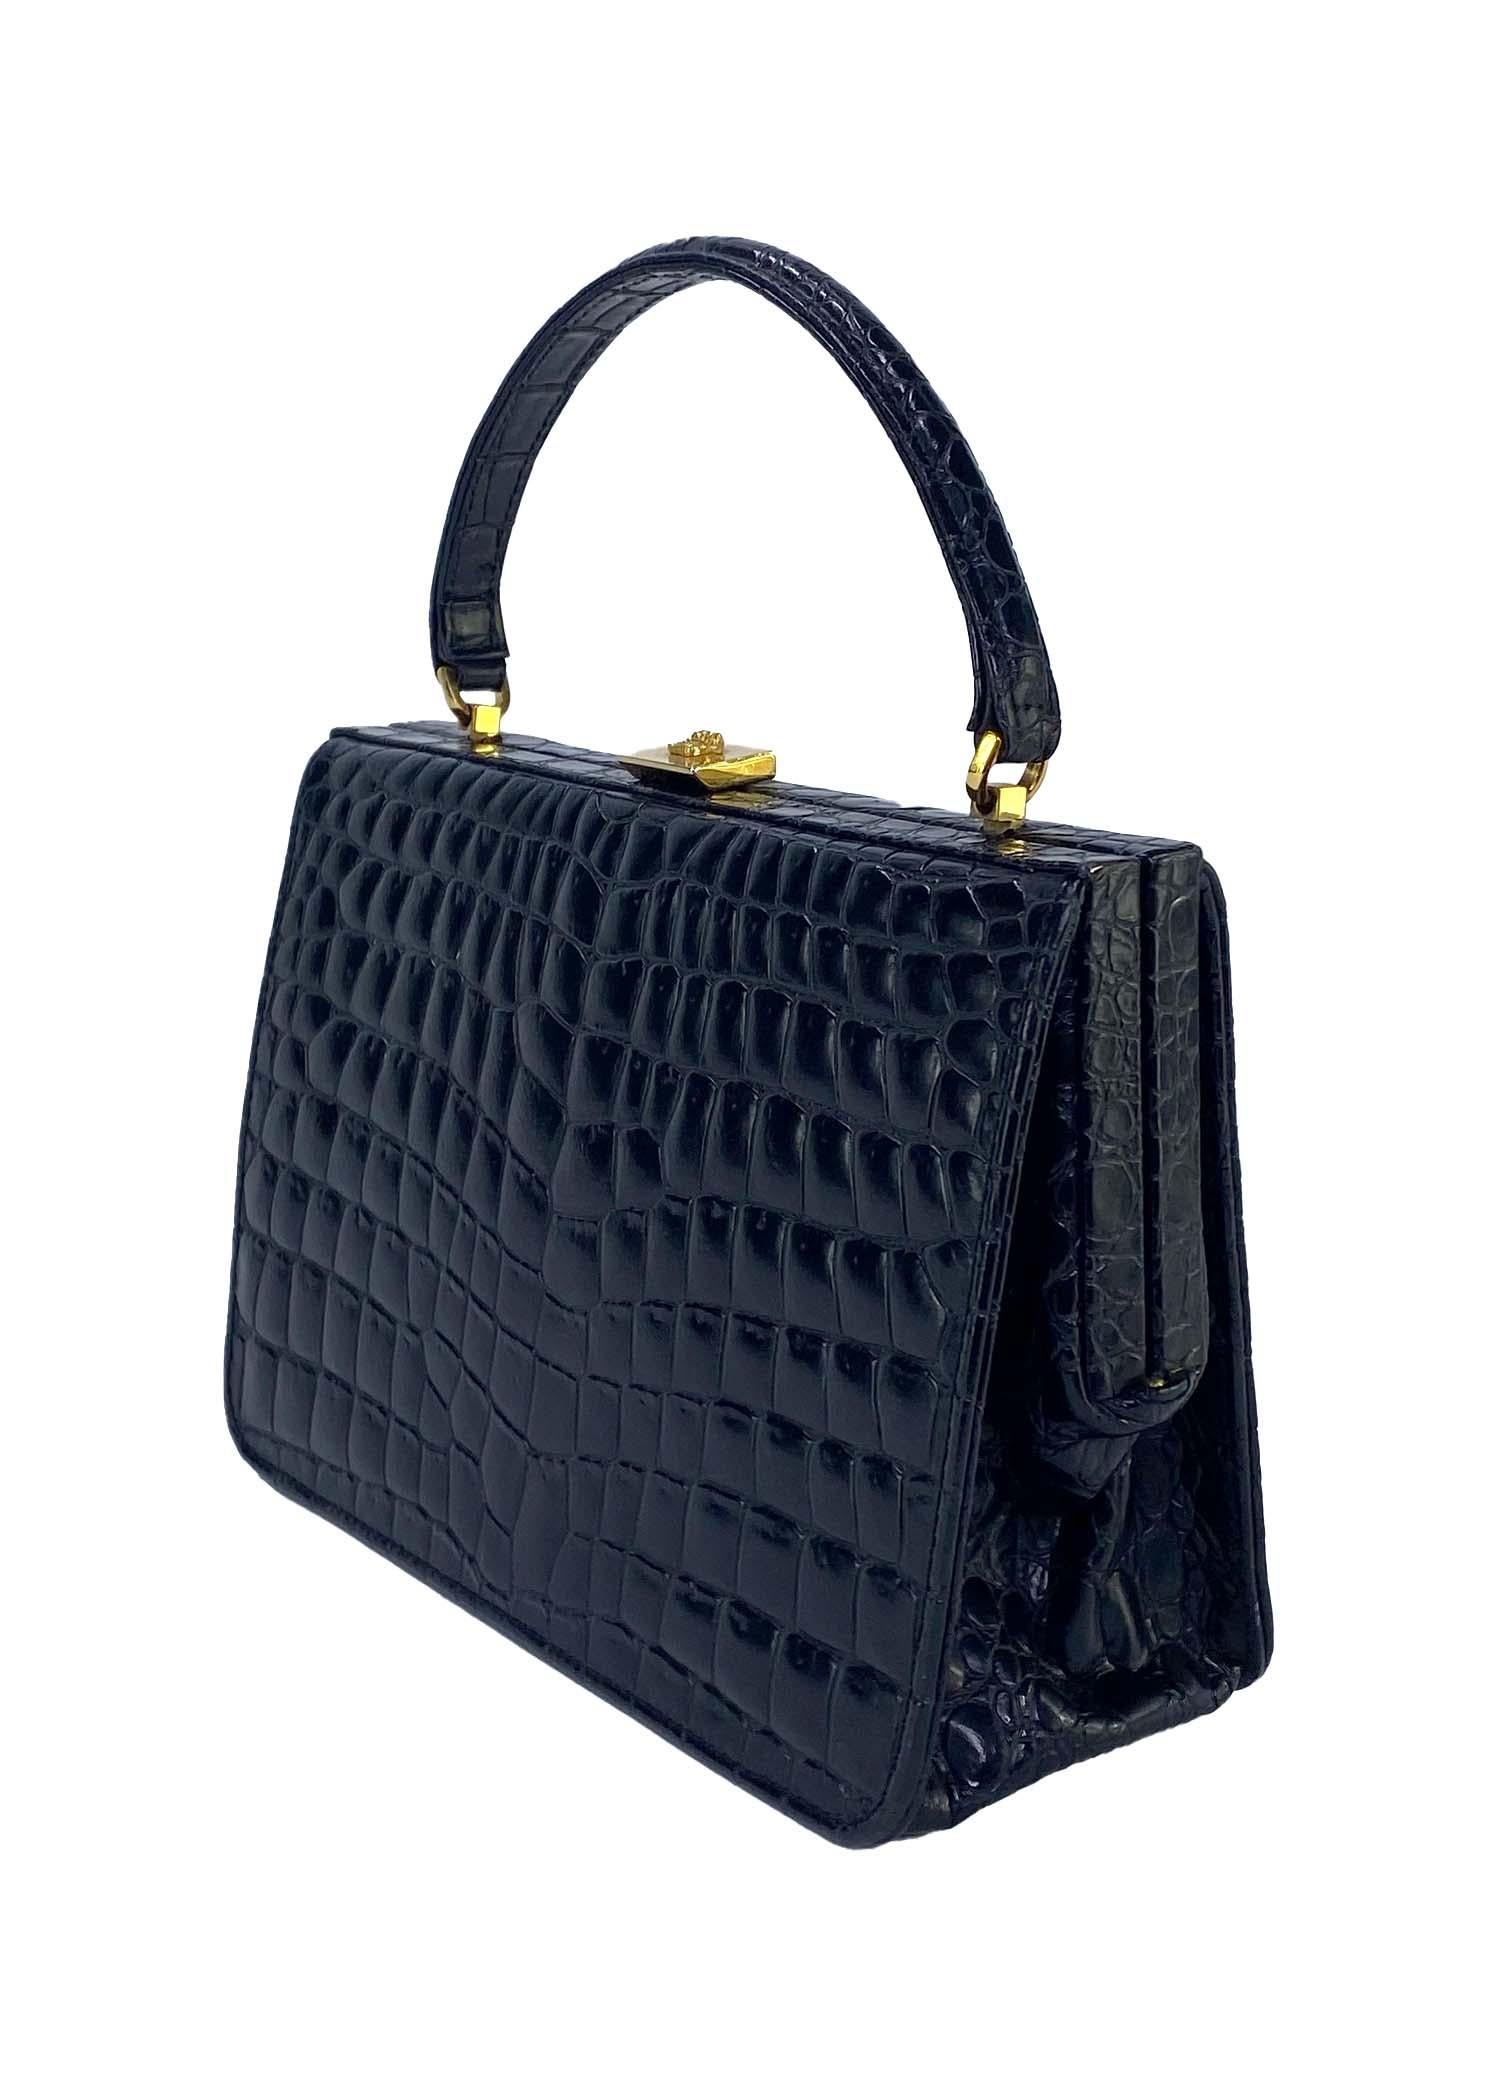 Presenting a beautiful embossed crocodile top handle Gianni Versace Couture bag, designed by Gianni Versace. From the early/mid 1990s, this bag is constructed entirely of embossed leather and features gold colored metal accents including a Medusa